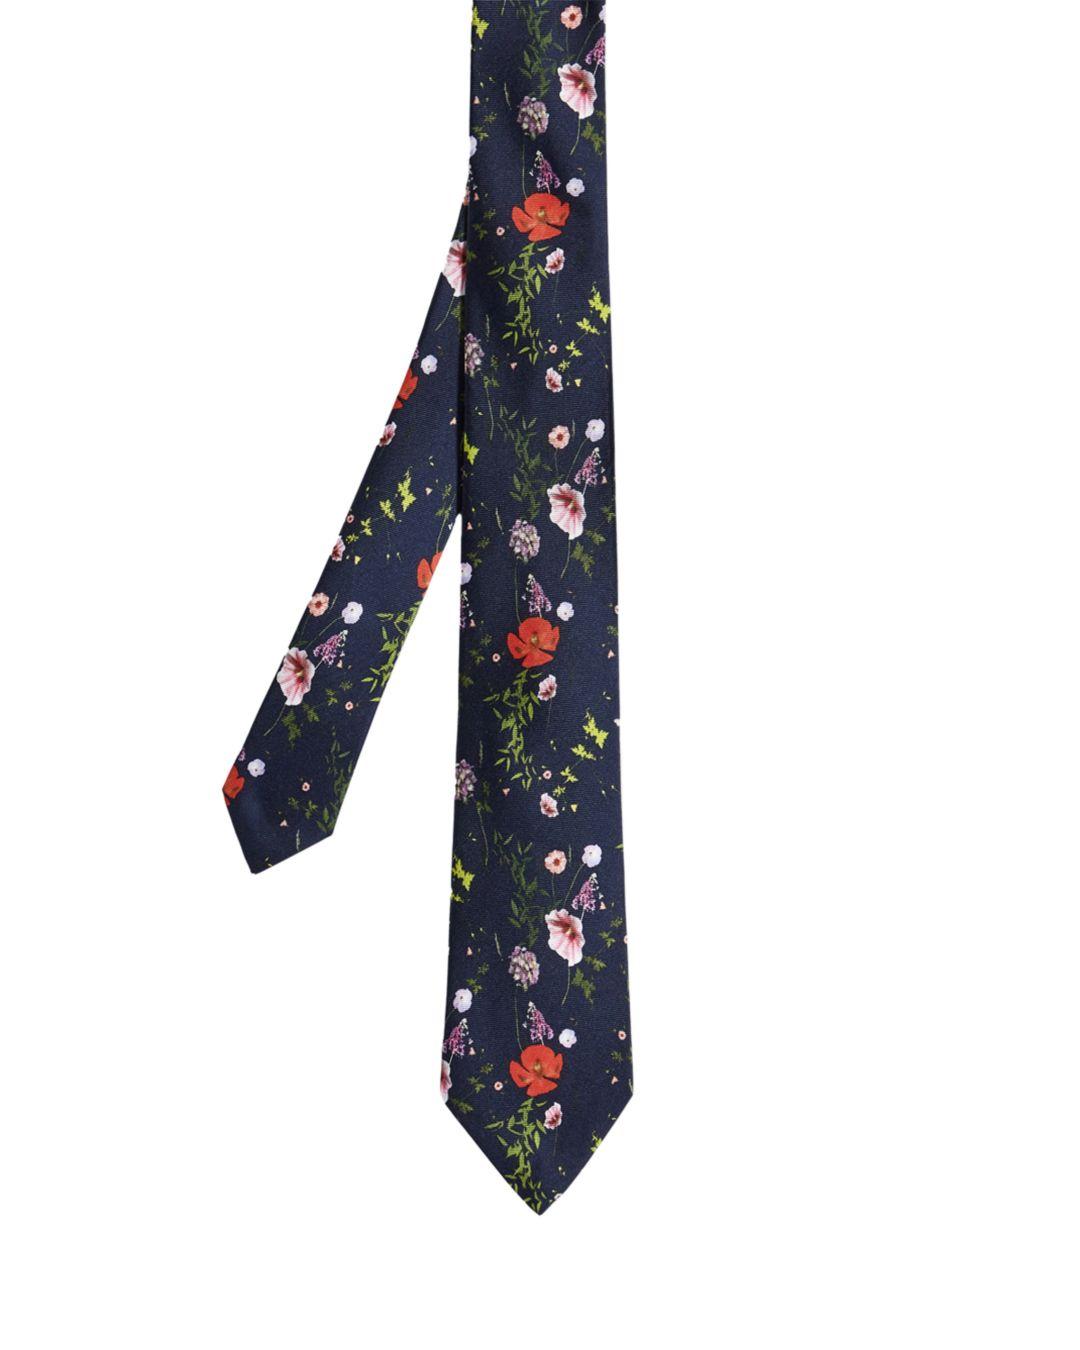 Ted Baker Floral Printed Silk Tie in Navy (White) for Men - Lyst